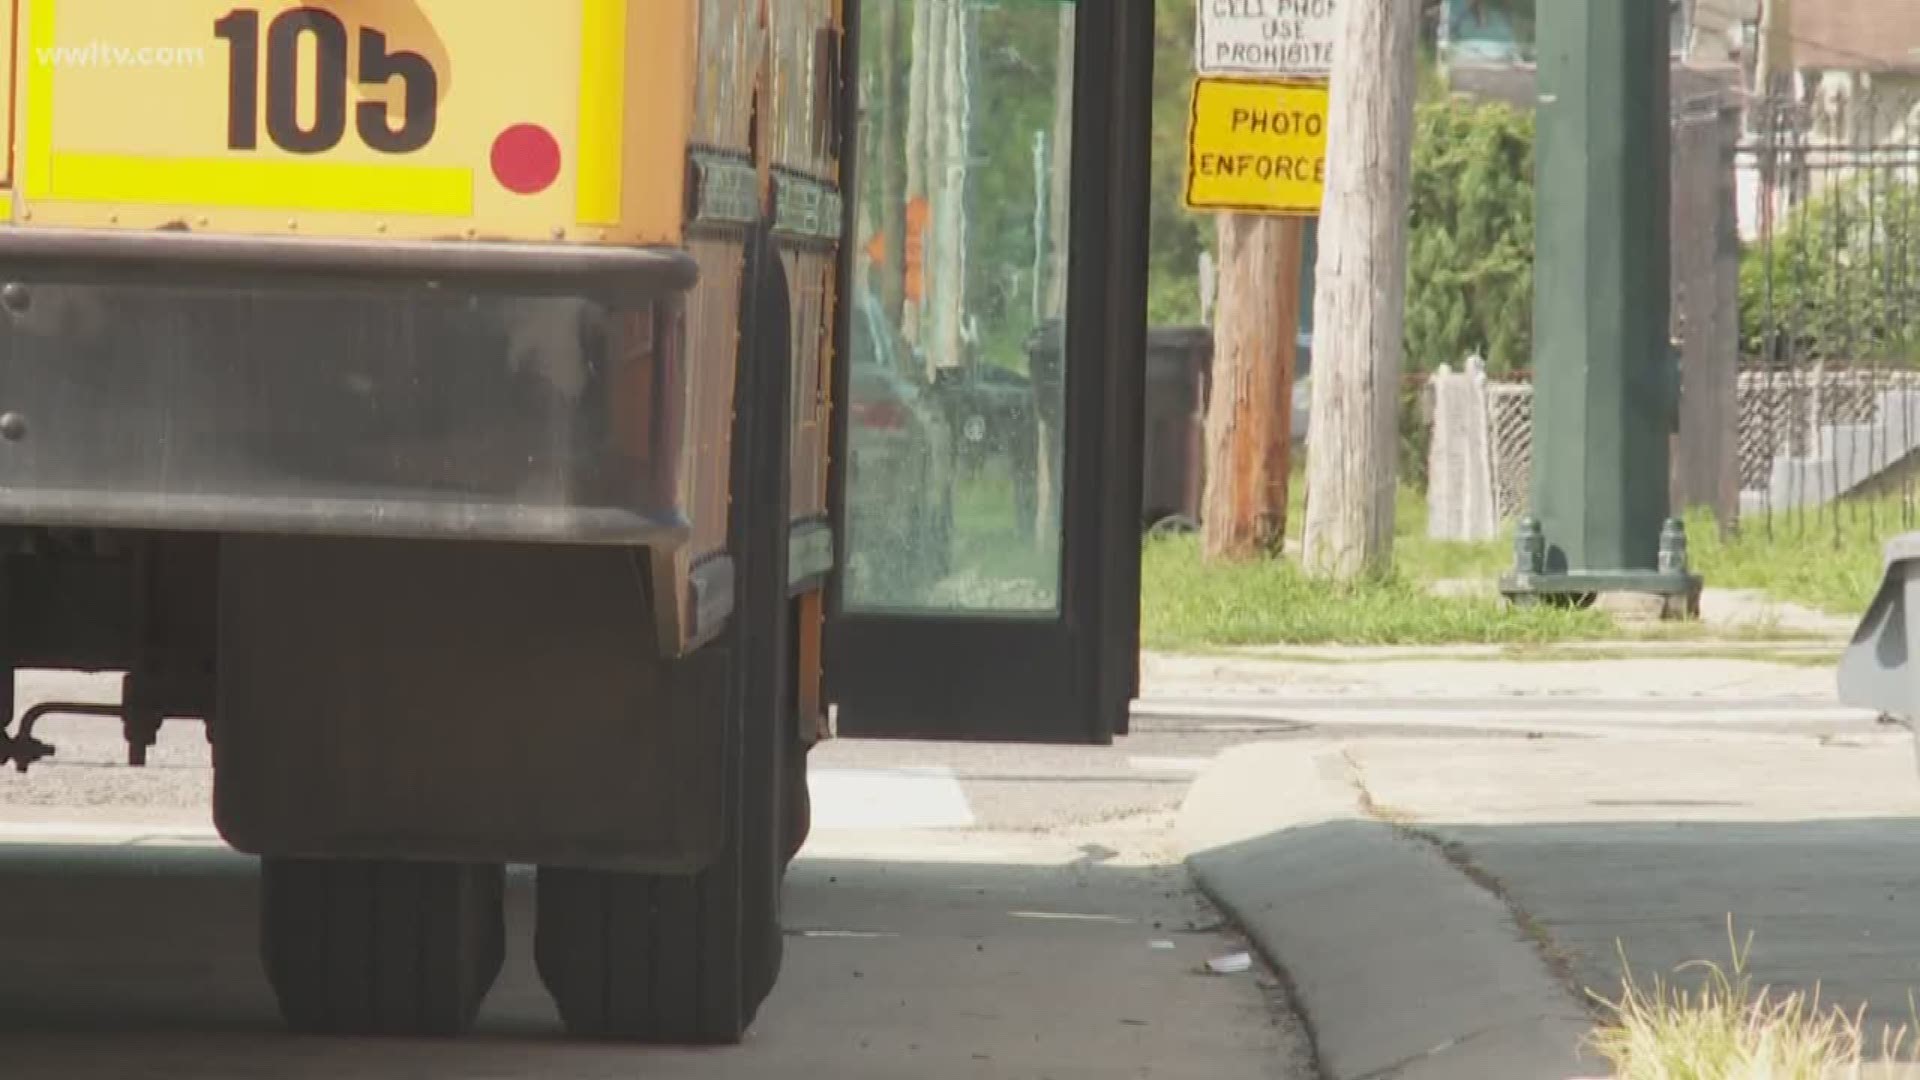 The number of buses has been reduced because of a reduction in local or state education funding and transportation. 